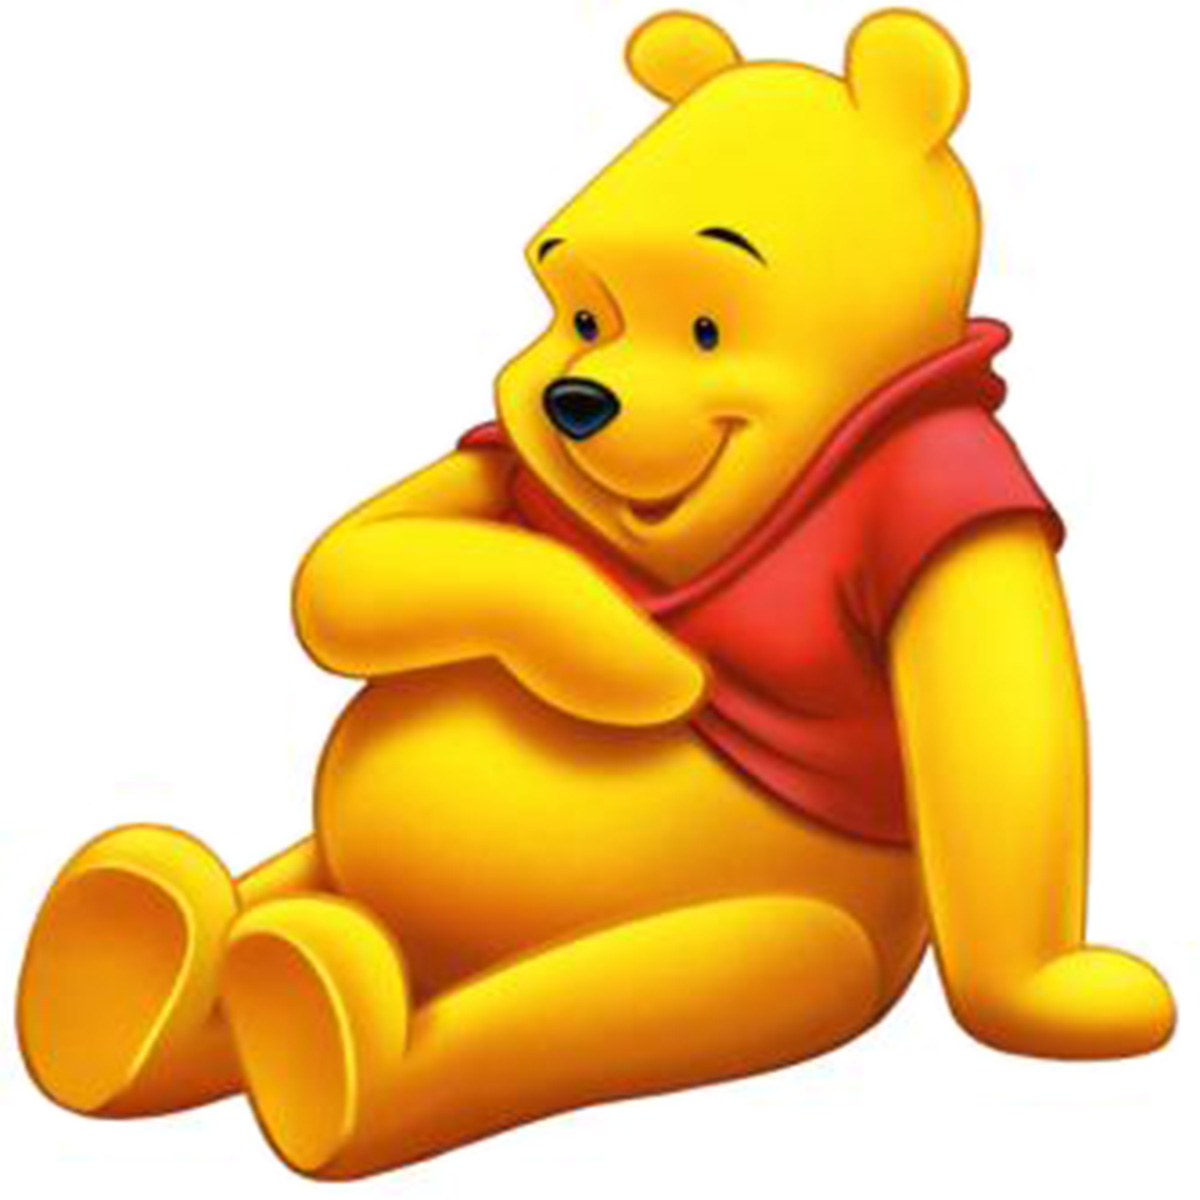 Cartoons Winnie The Pooh Wallpaper High Quality Background